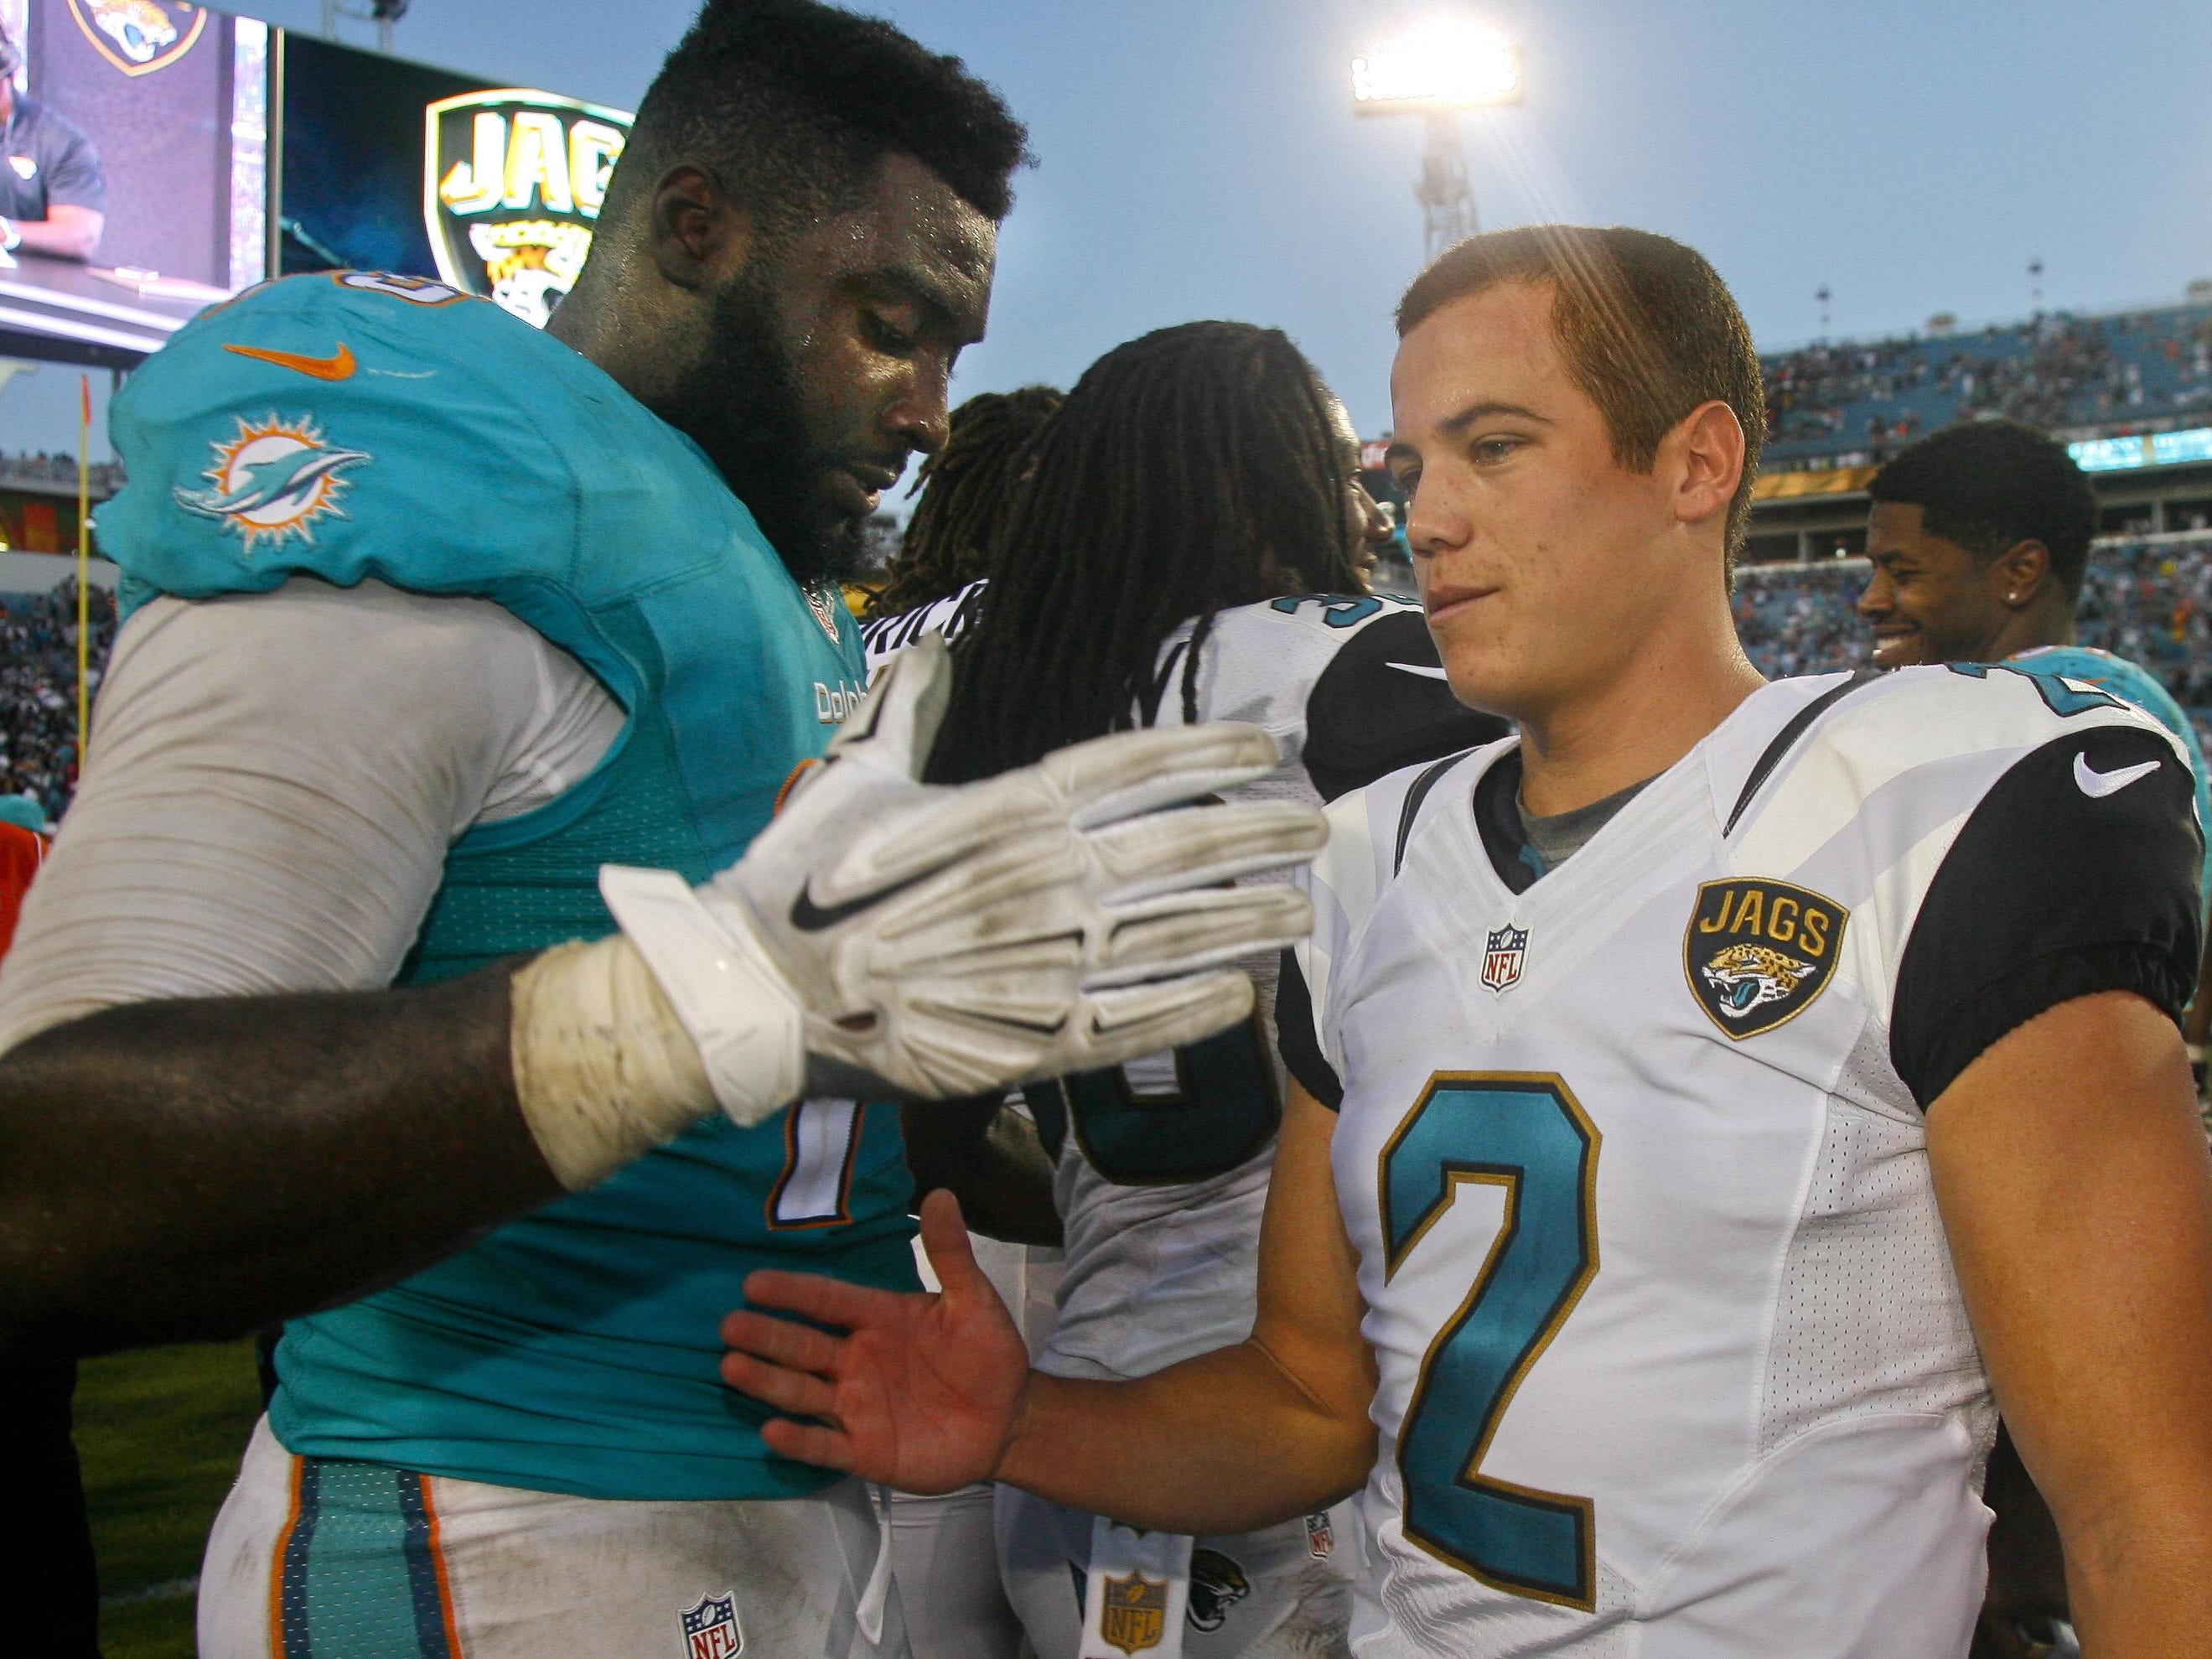 Marist College alumni Terrence Fede of the Miami Dolphins, left, and Jason Myers of the Jacksonville Jaguars, meet on the field after the Jaguars defeated the Dolphins 23-20 on Sept. 20, 2015 in Jacksonville, Florida.